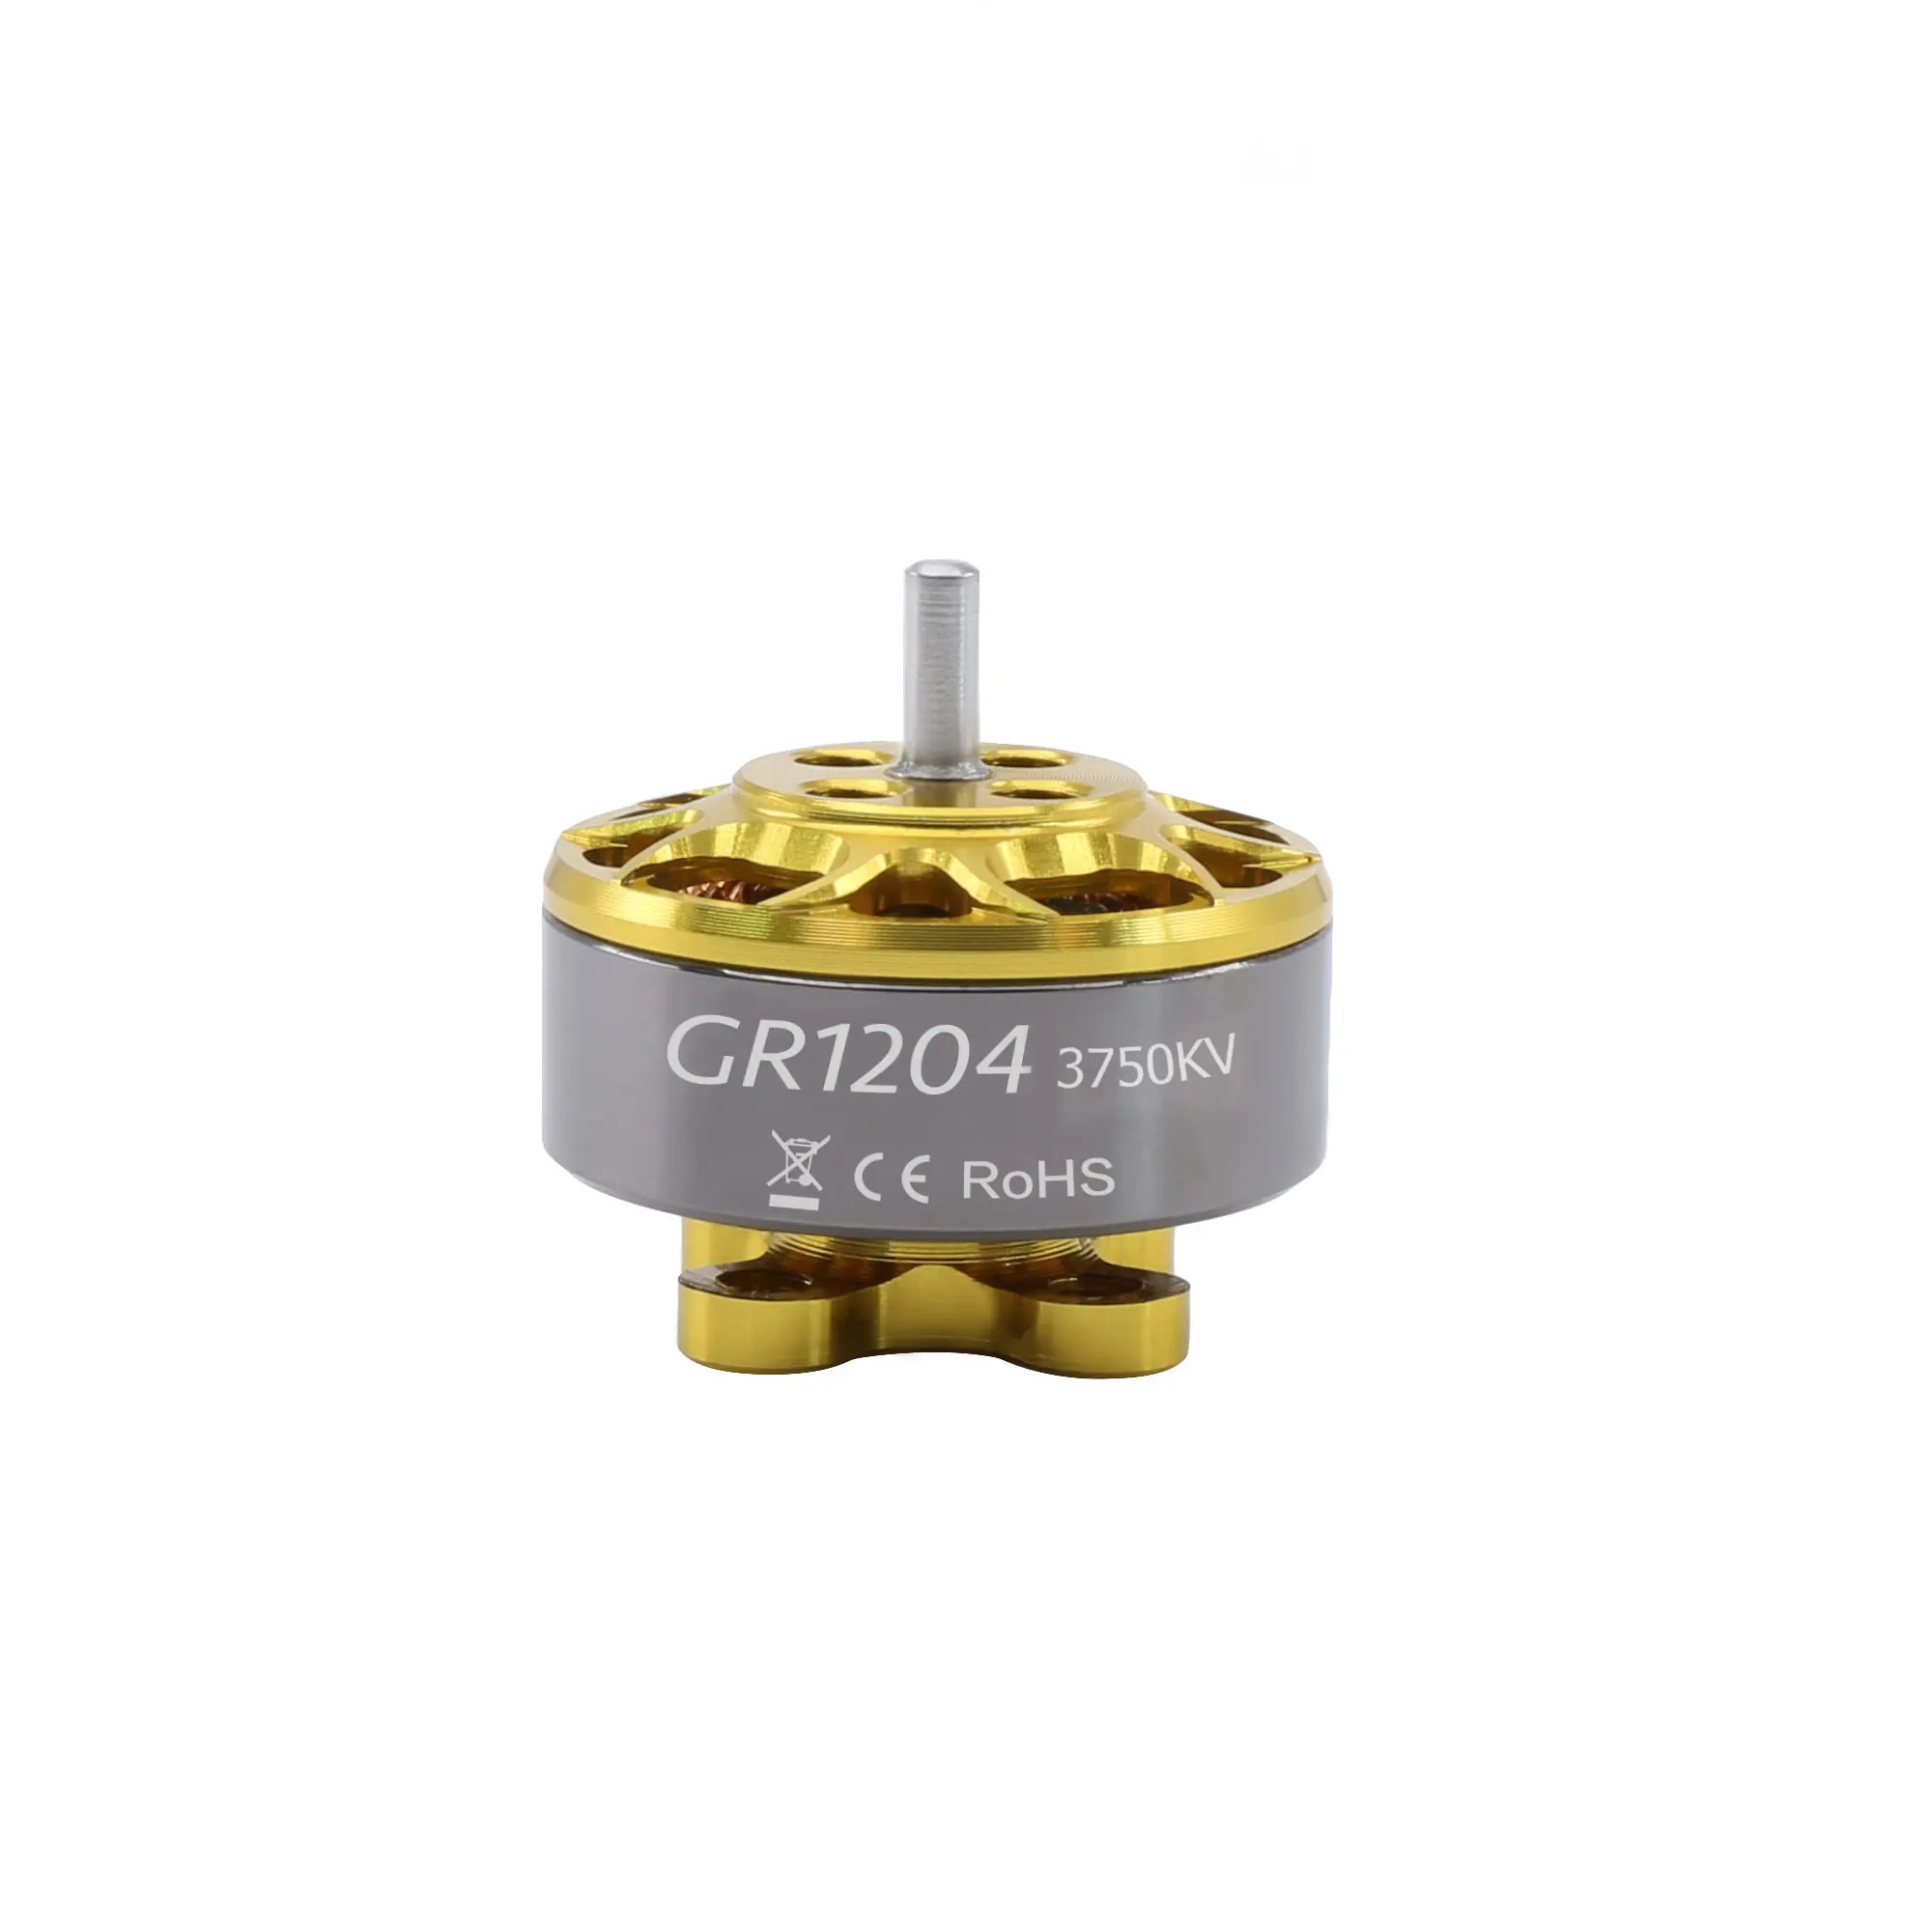 GEPRC GR1204 3750kv Motors Suitable For Toothpick Cinewhoop Series Drone For RC FPV Quadcopter Freestyle Drone Replacement Parts